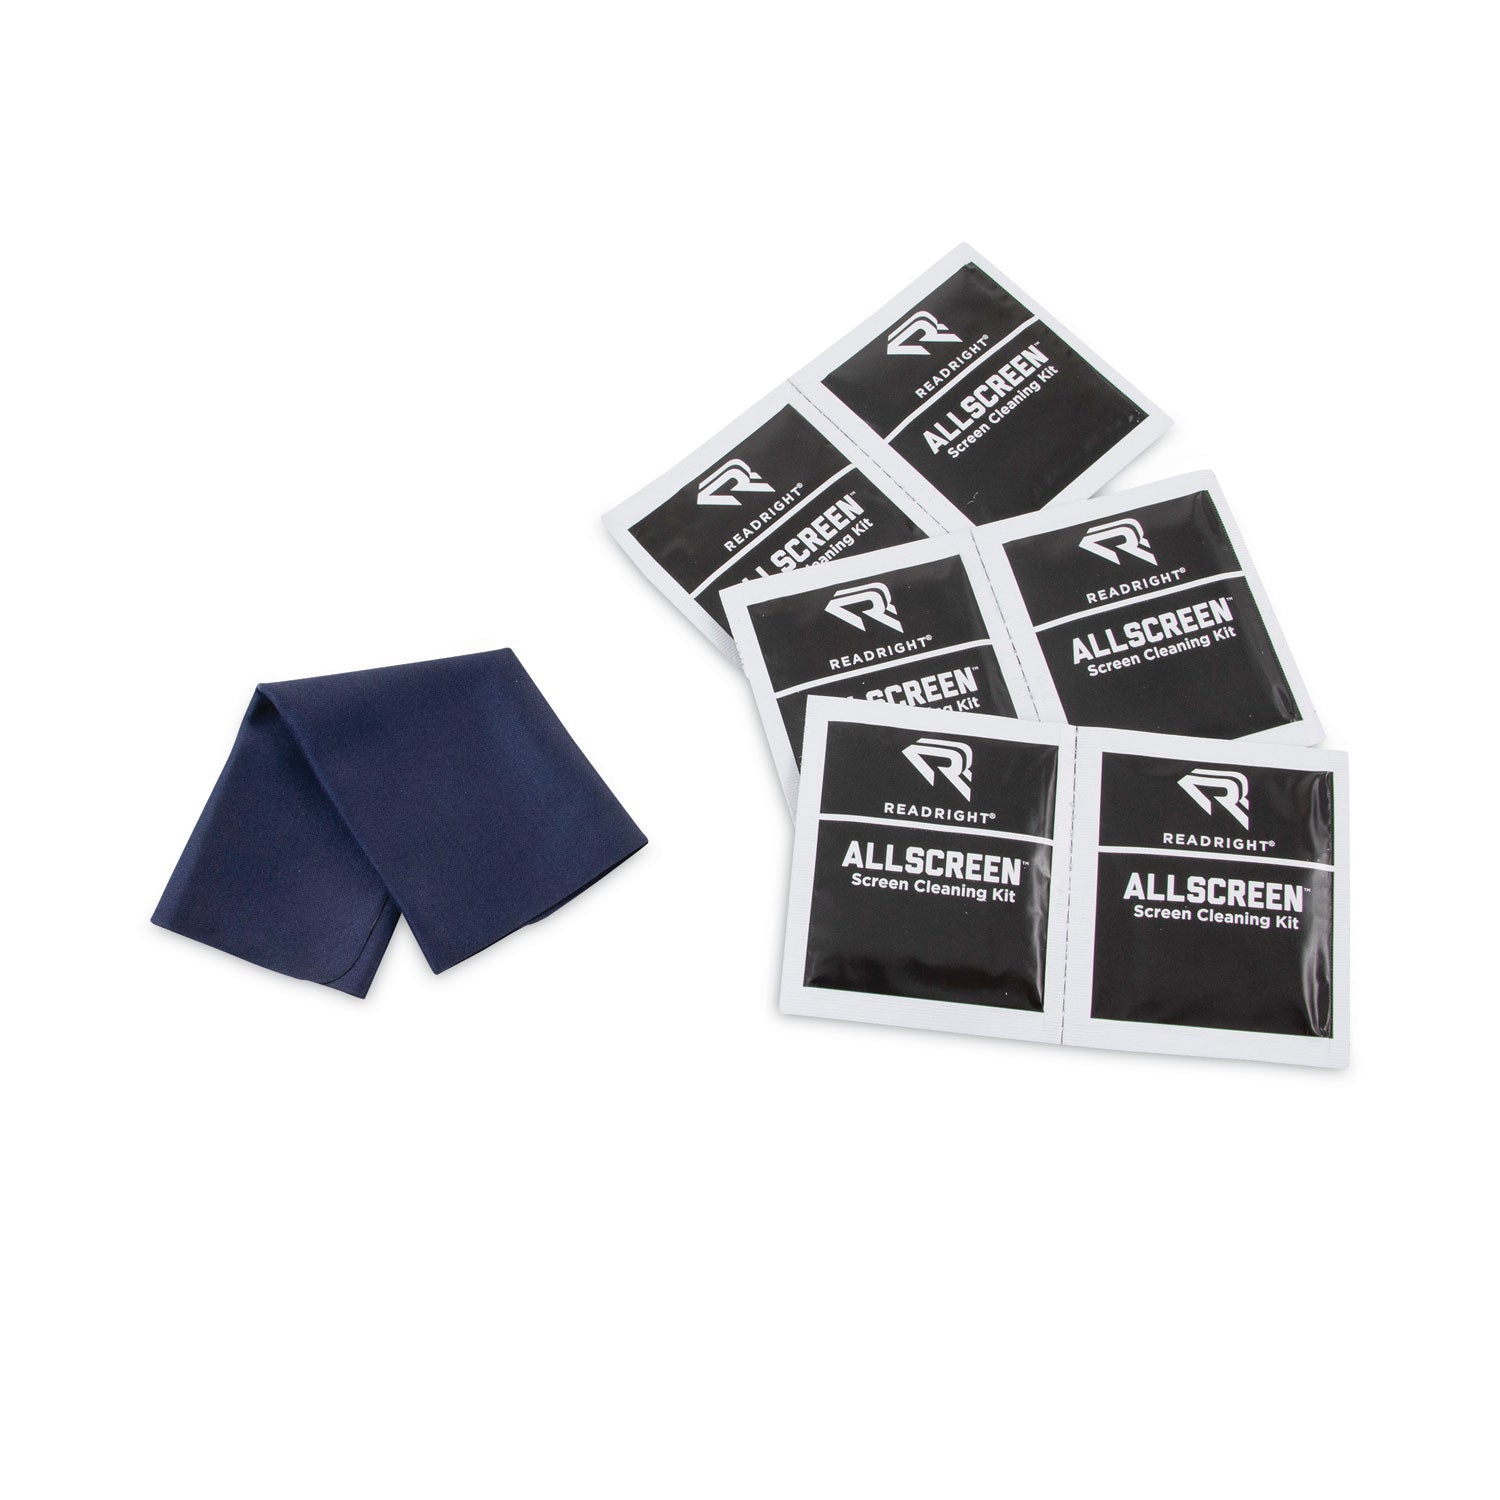 allscreen-cleaning-kit-with-1-6-x-6-microfiber-cloth-50-4-x-5-individually-wrapped-pre-saturated-wipes-unscented-white_rearr15039 - 4